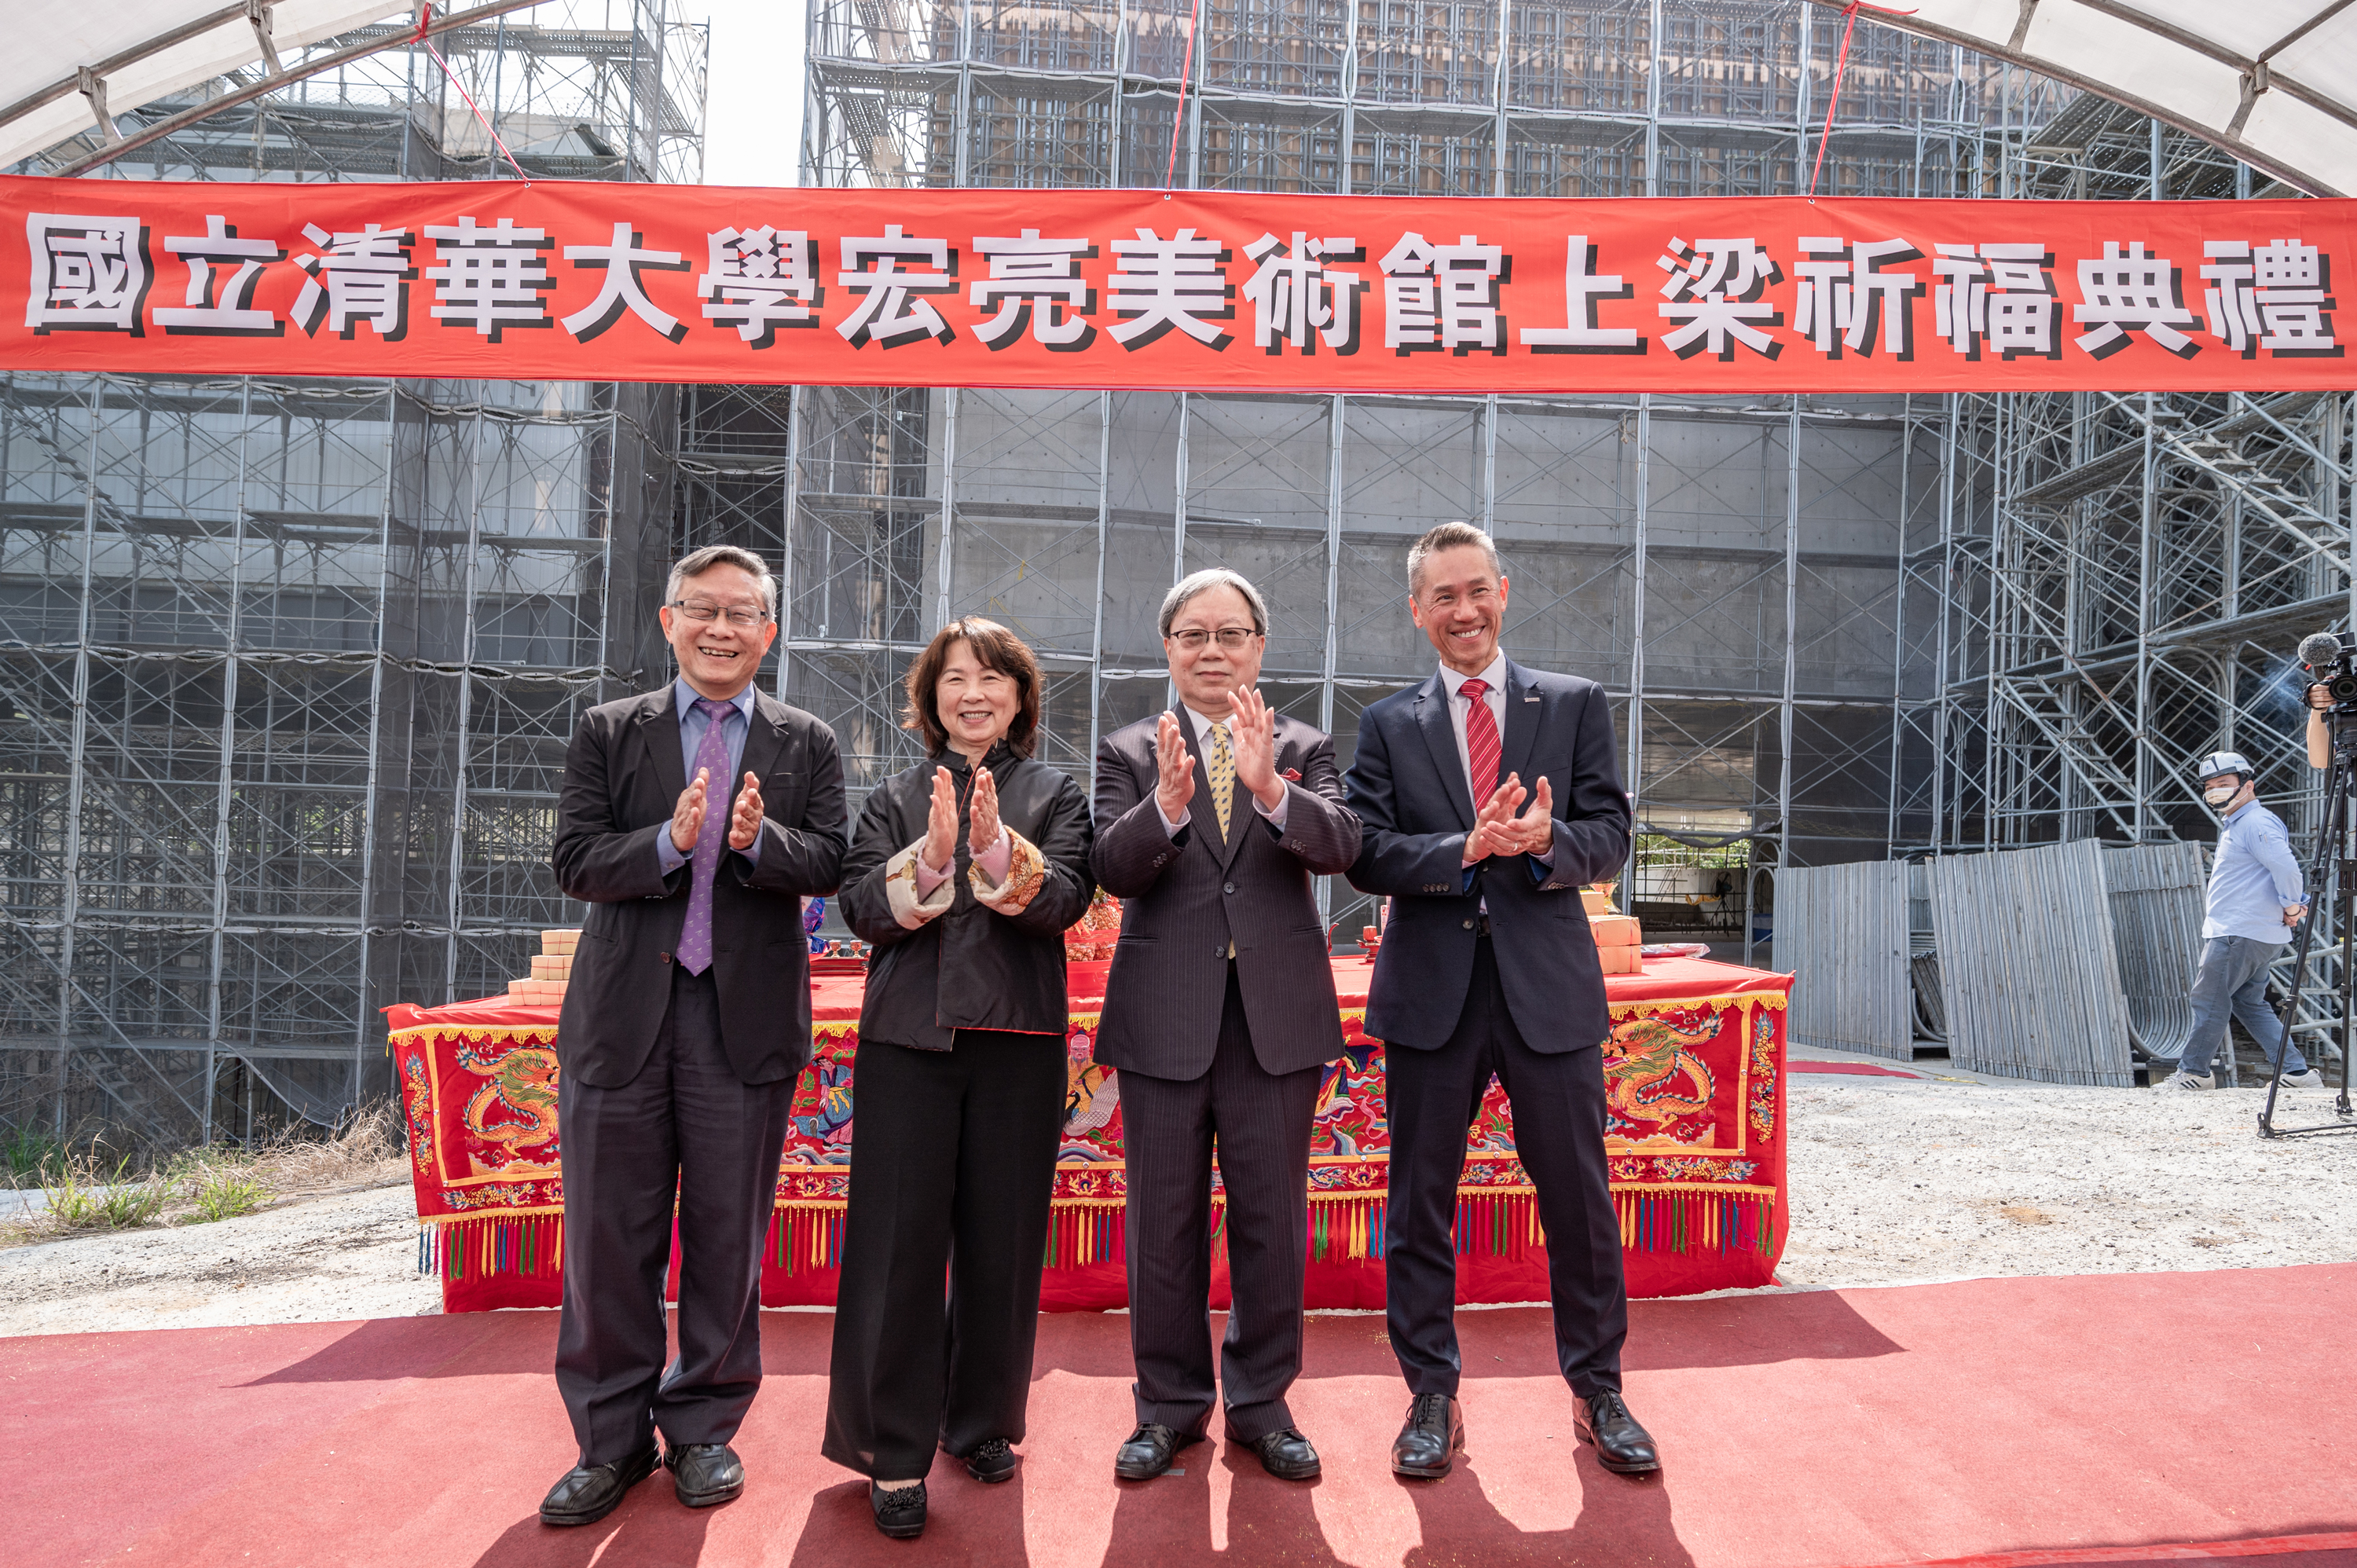 The beam-raising ceremony for the Hong Liang Art Museum was held by NTHU, with President W. John Kao (right), donor Chairman Hong-Liang Hsieh, Mrs. Fen-Ching Chiu (center), and former President Hocheng Hong (left), praying for the project's success. (Photo: National Tsing Hua University)